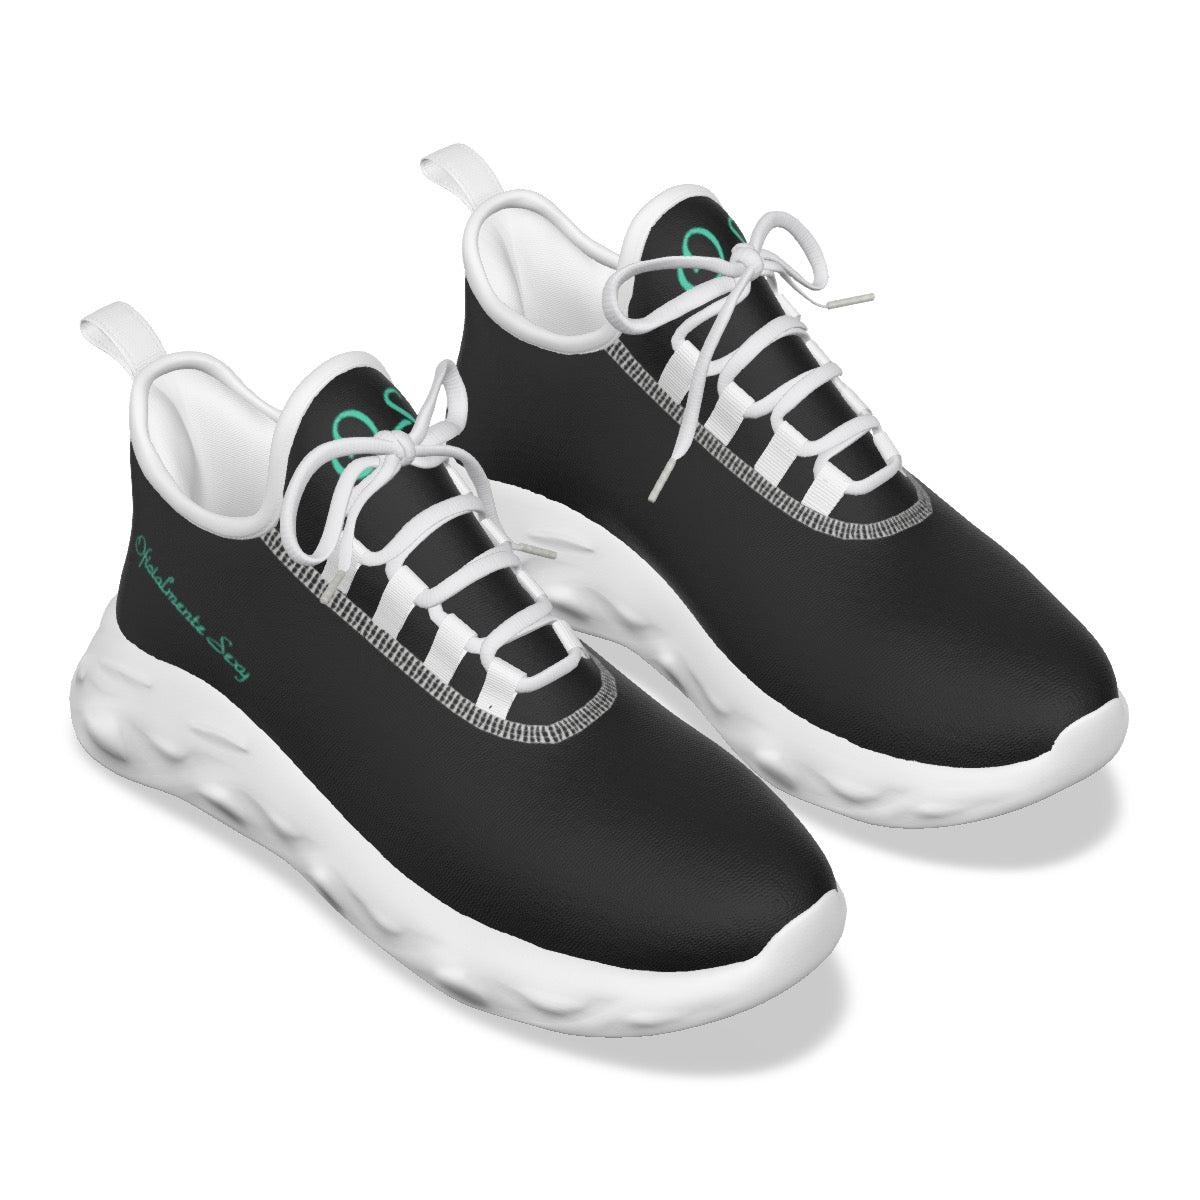 Oficialmente Sexy Black Women's Light Sports Shoes With Turquoise Green Logos